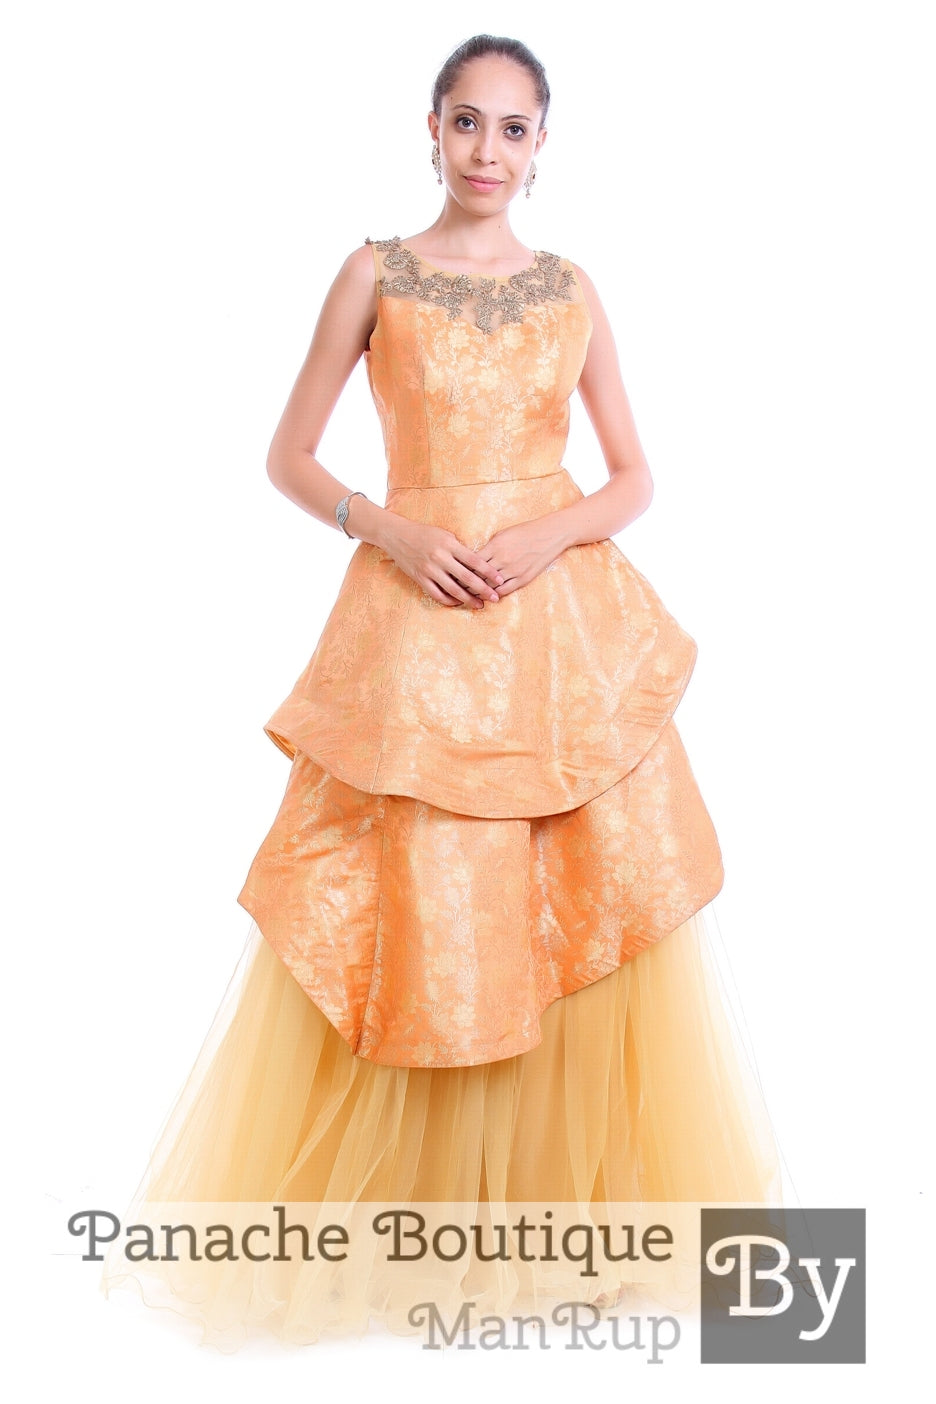 Peach floral embroidered stone satin ruffle frill layered gown